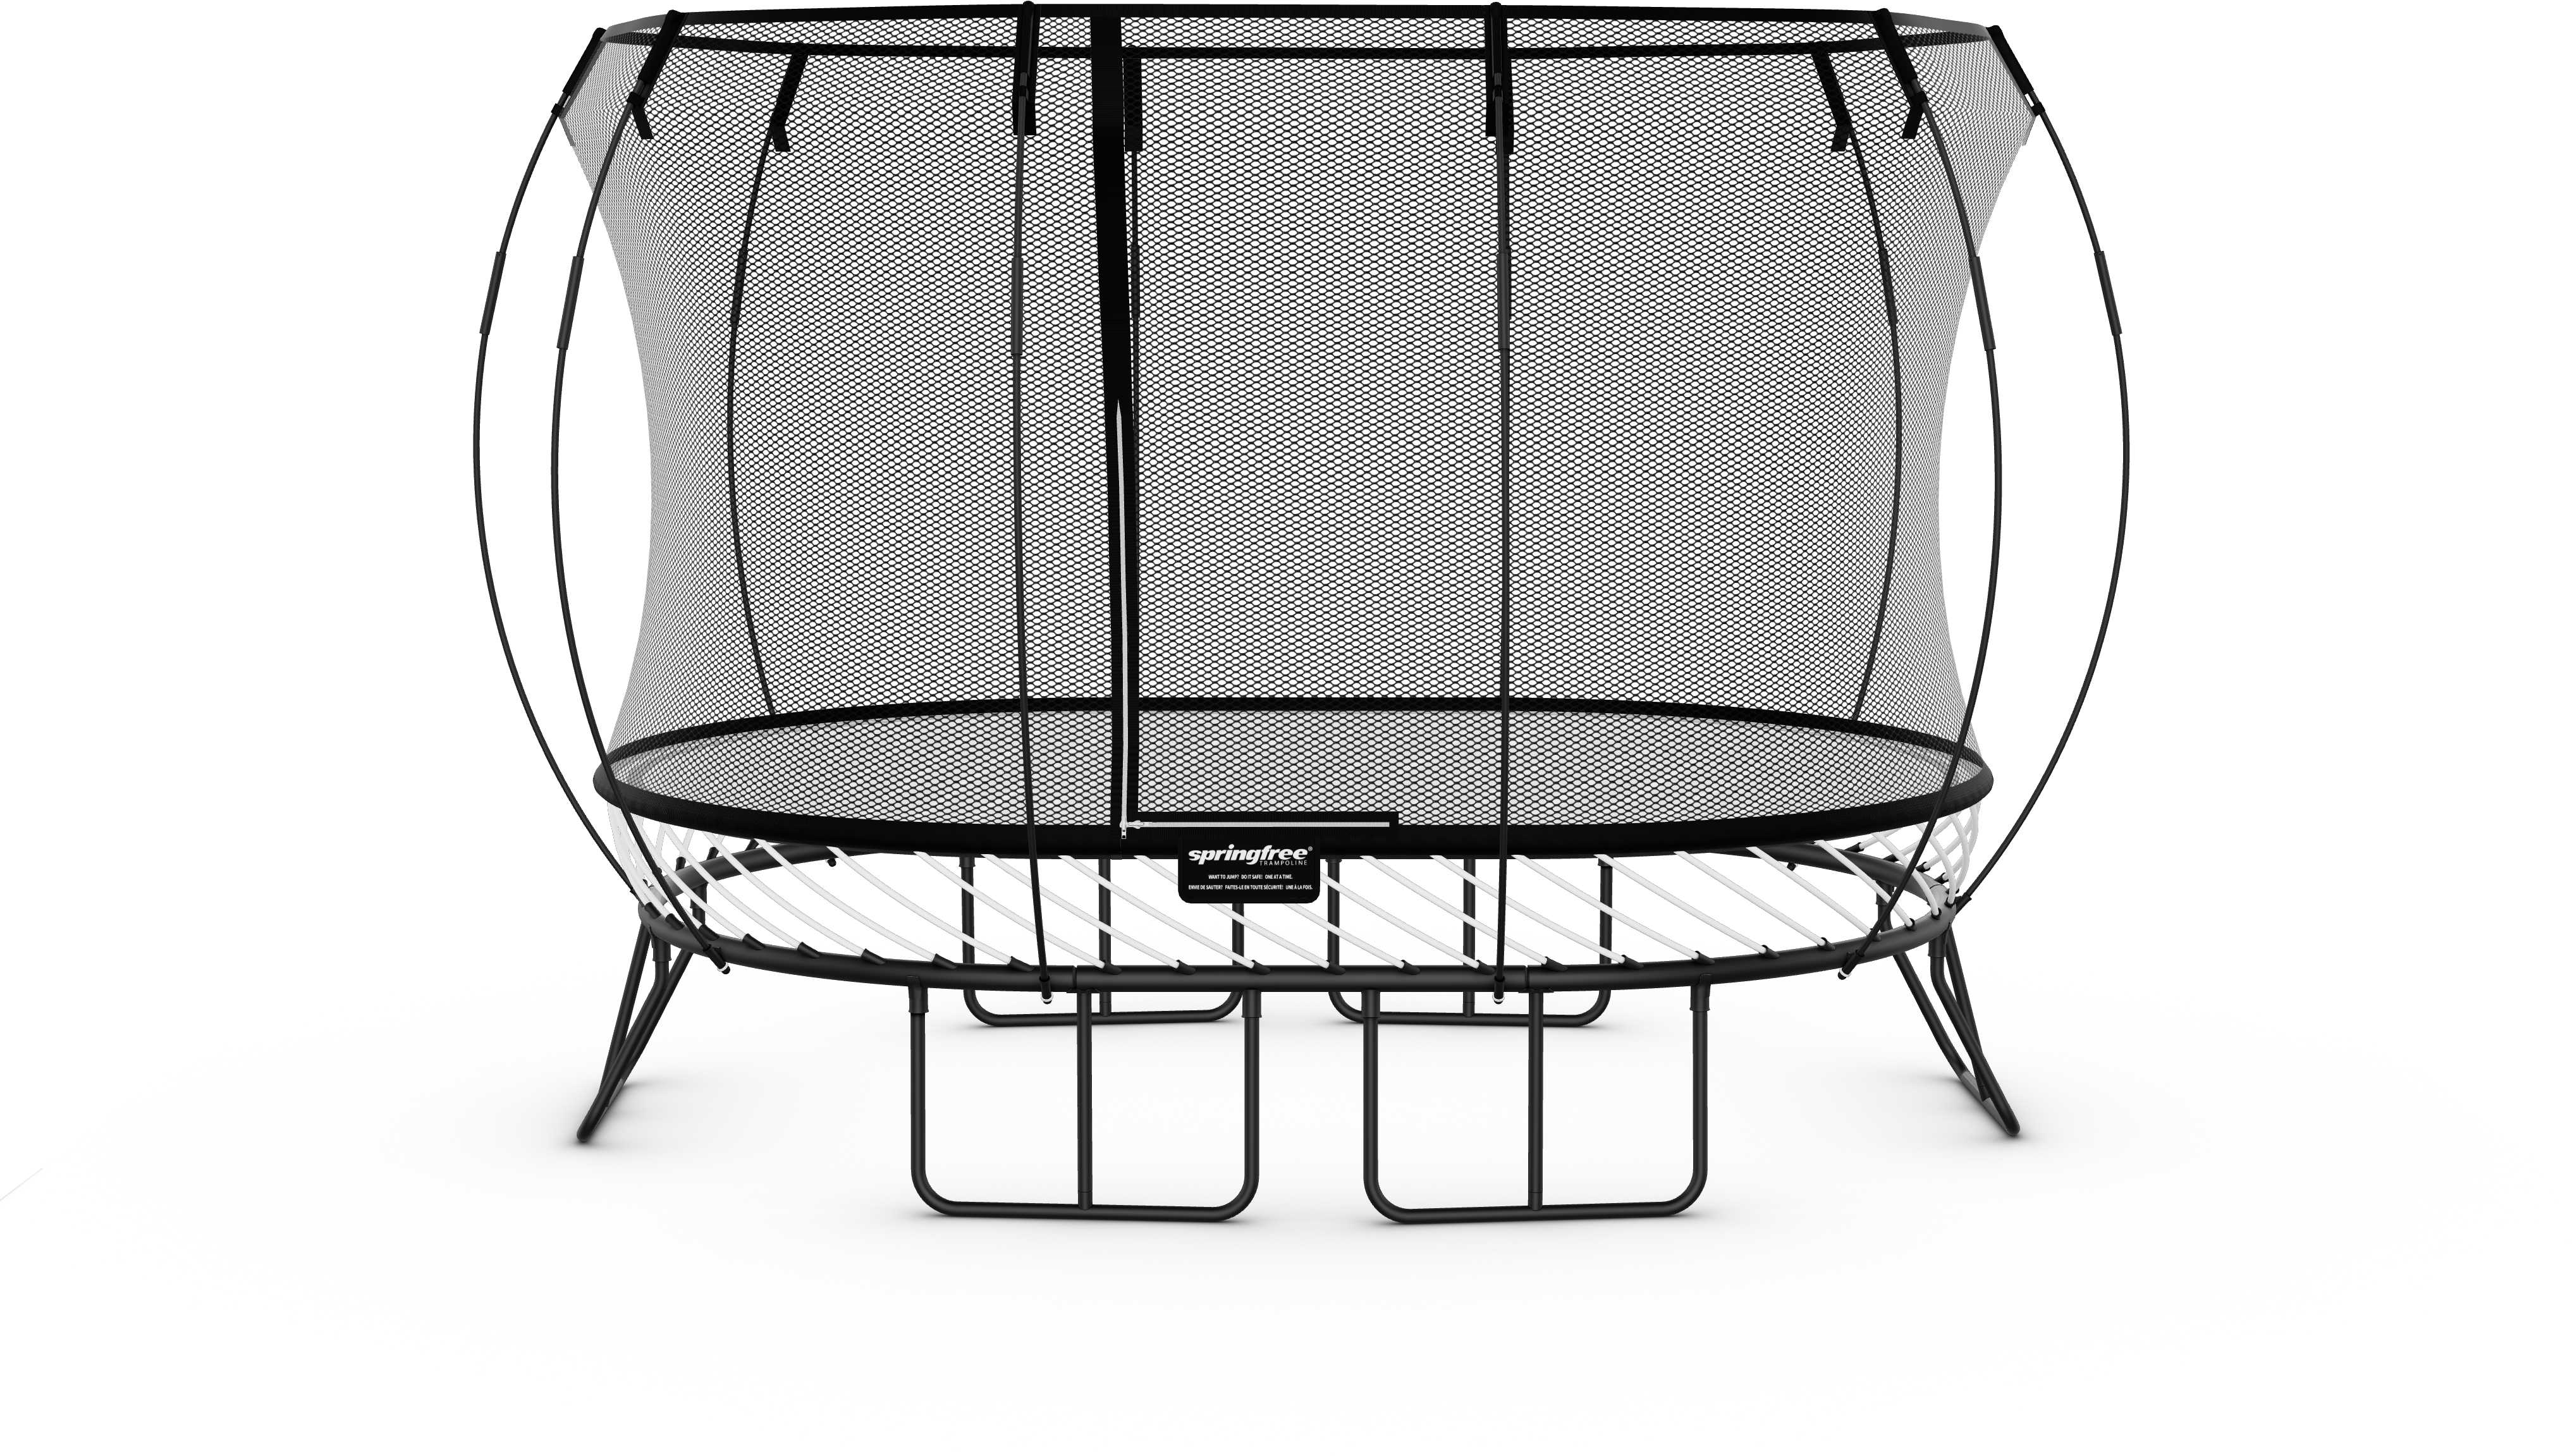 Springfree x 11' Oval Trampoline with - Play N' Learn